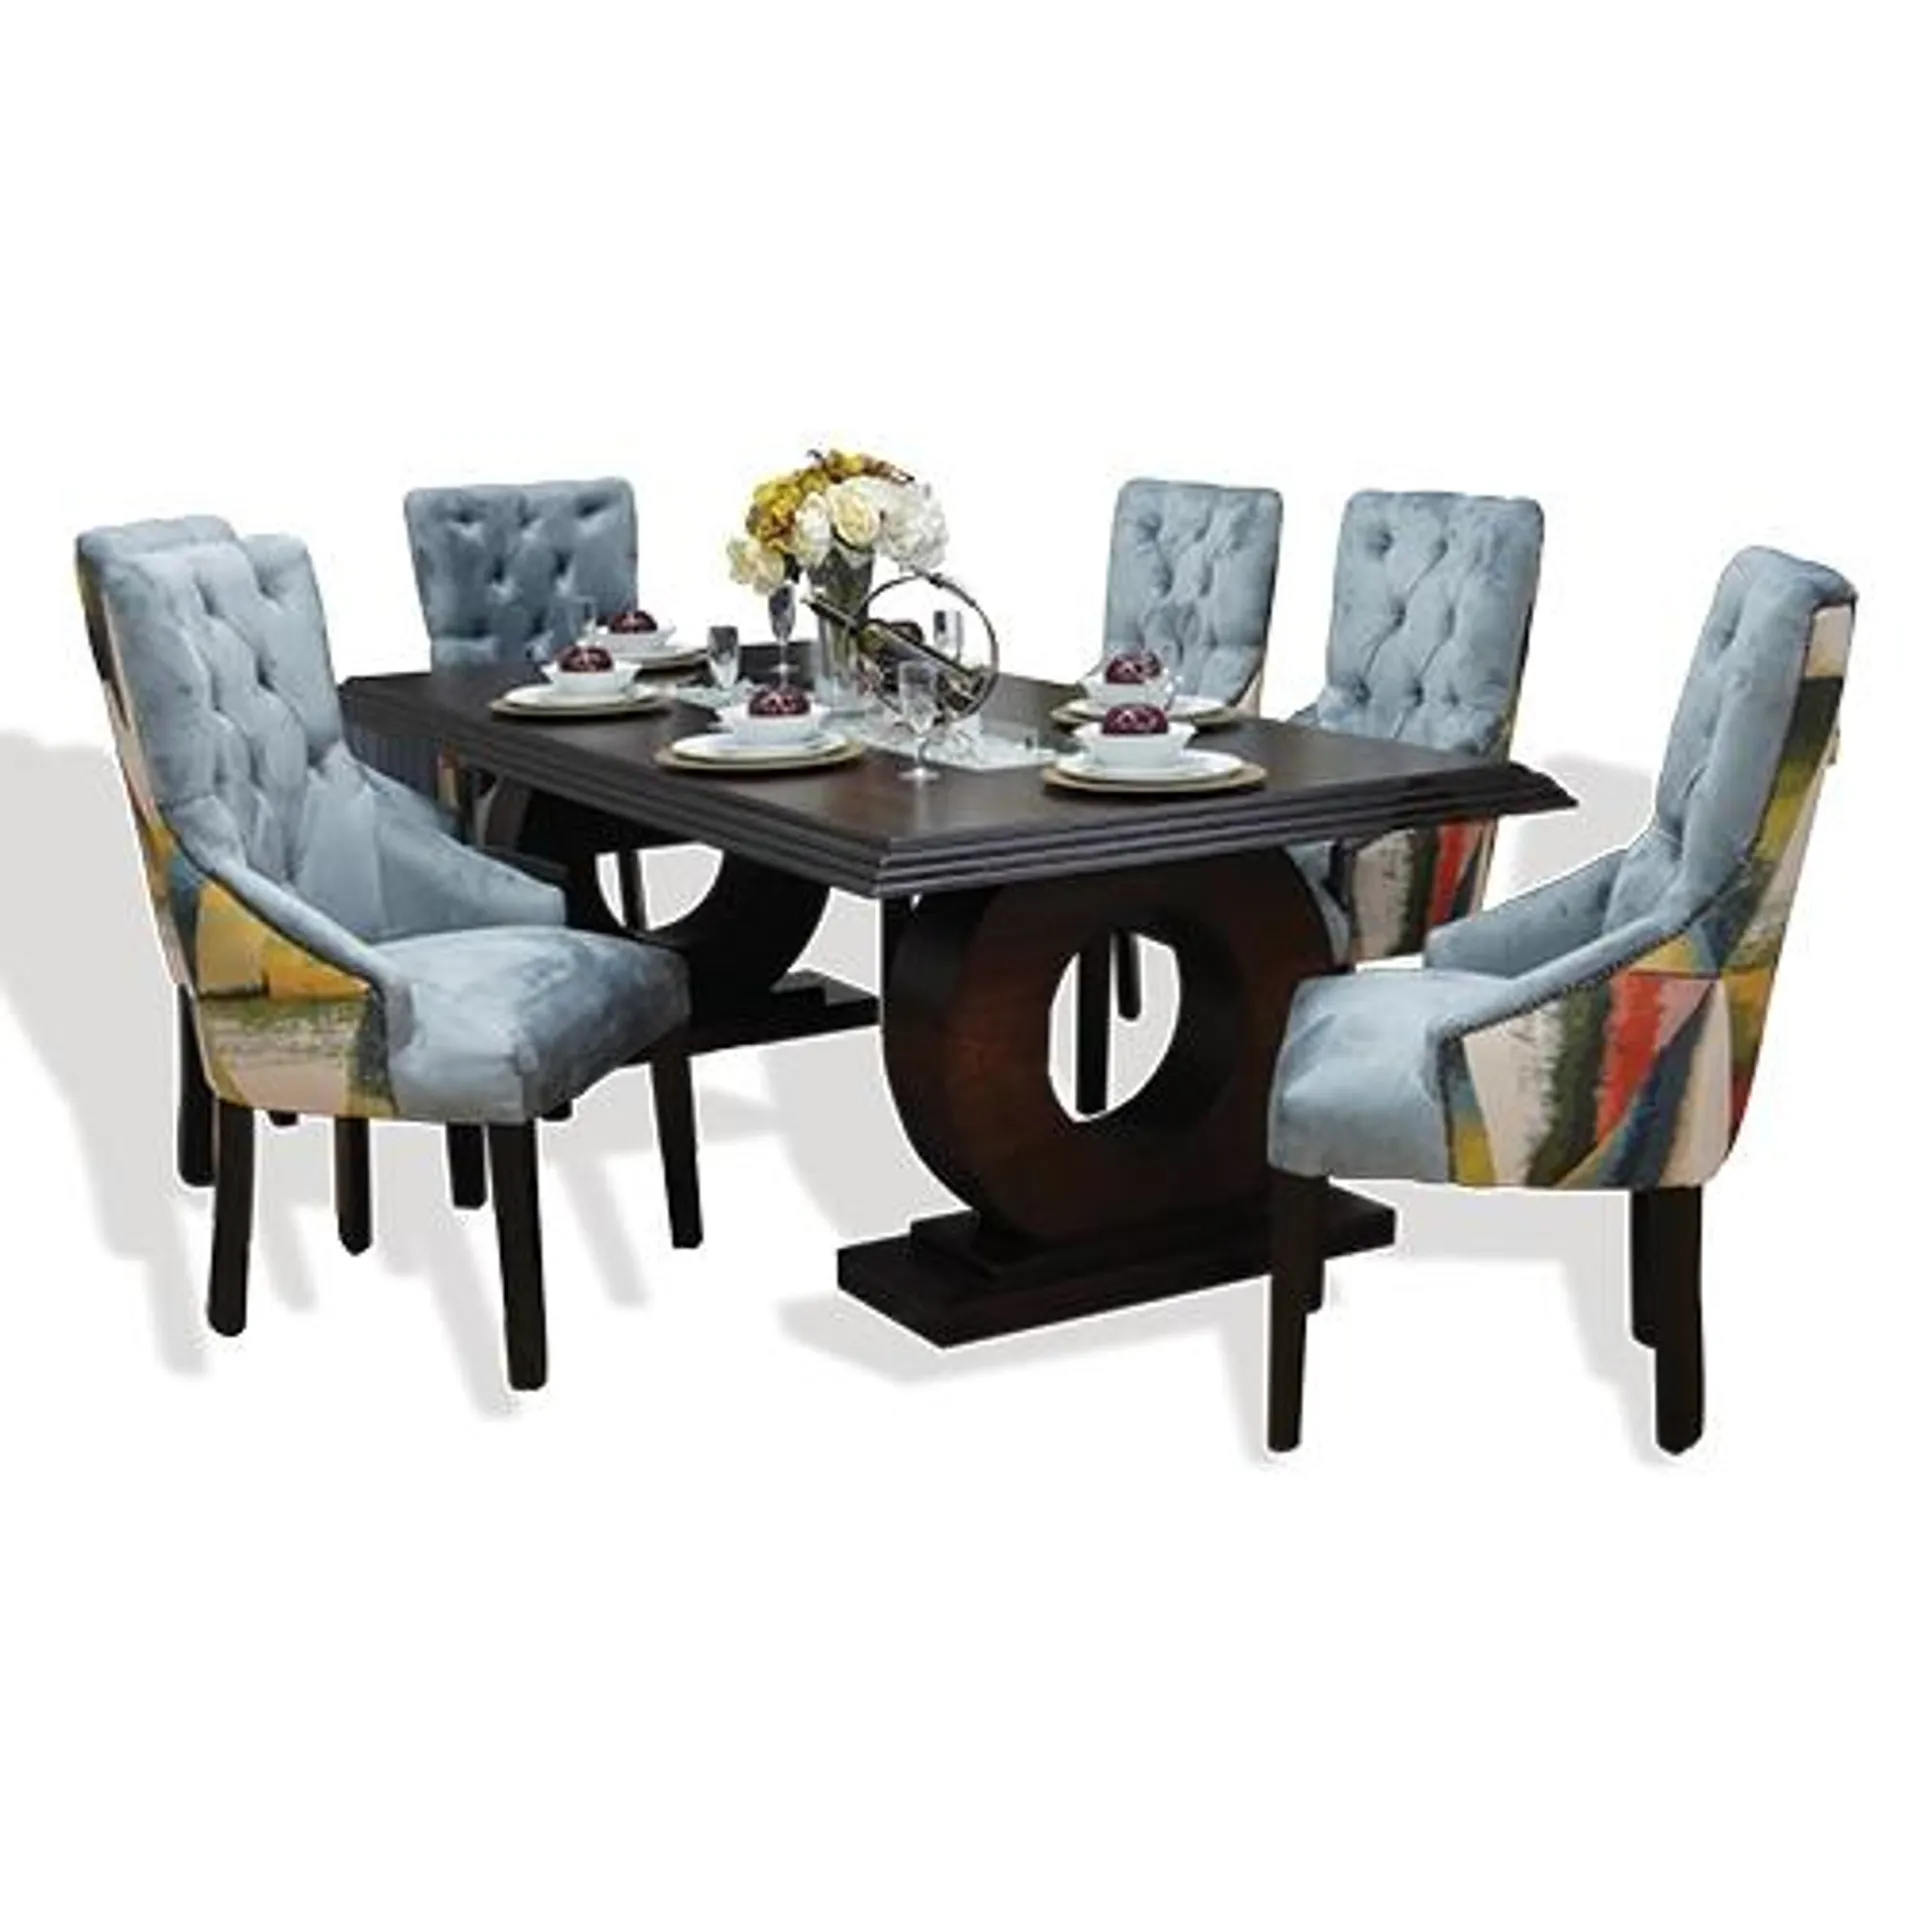 Bali Dining Suite 6 Seater